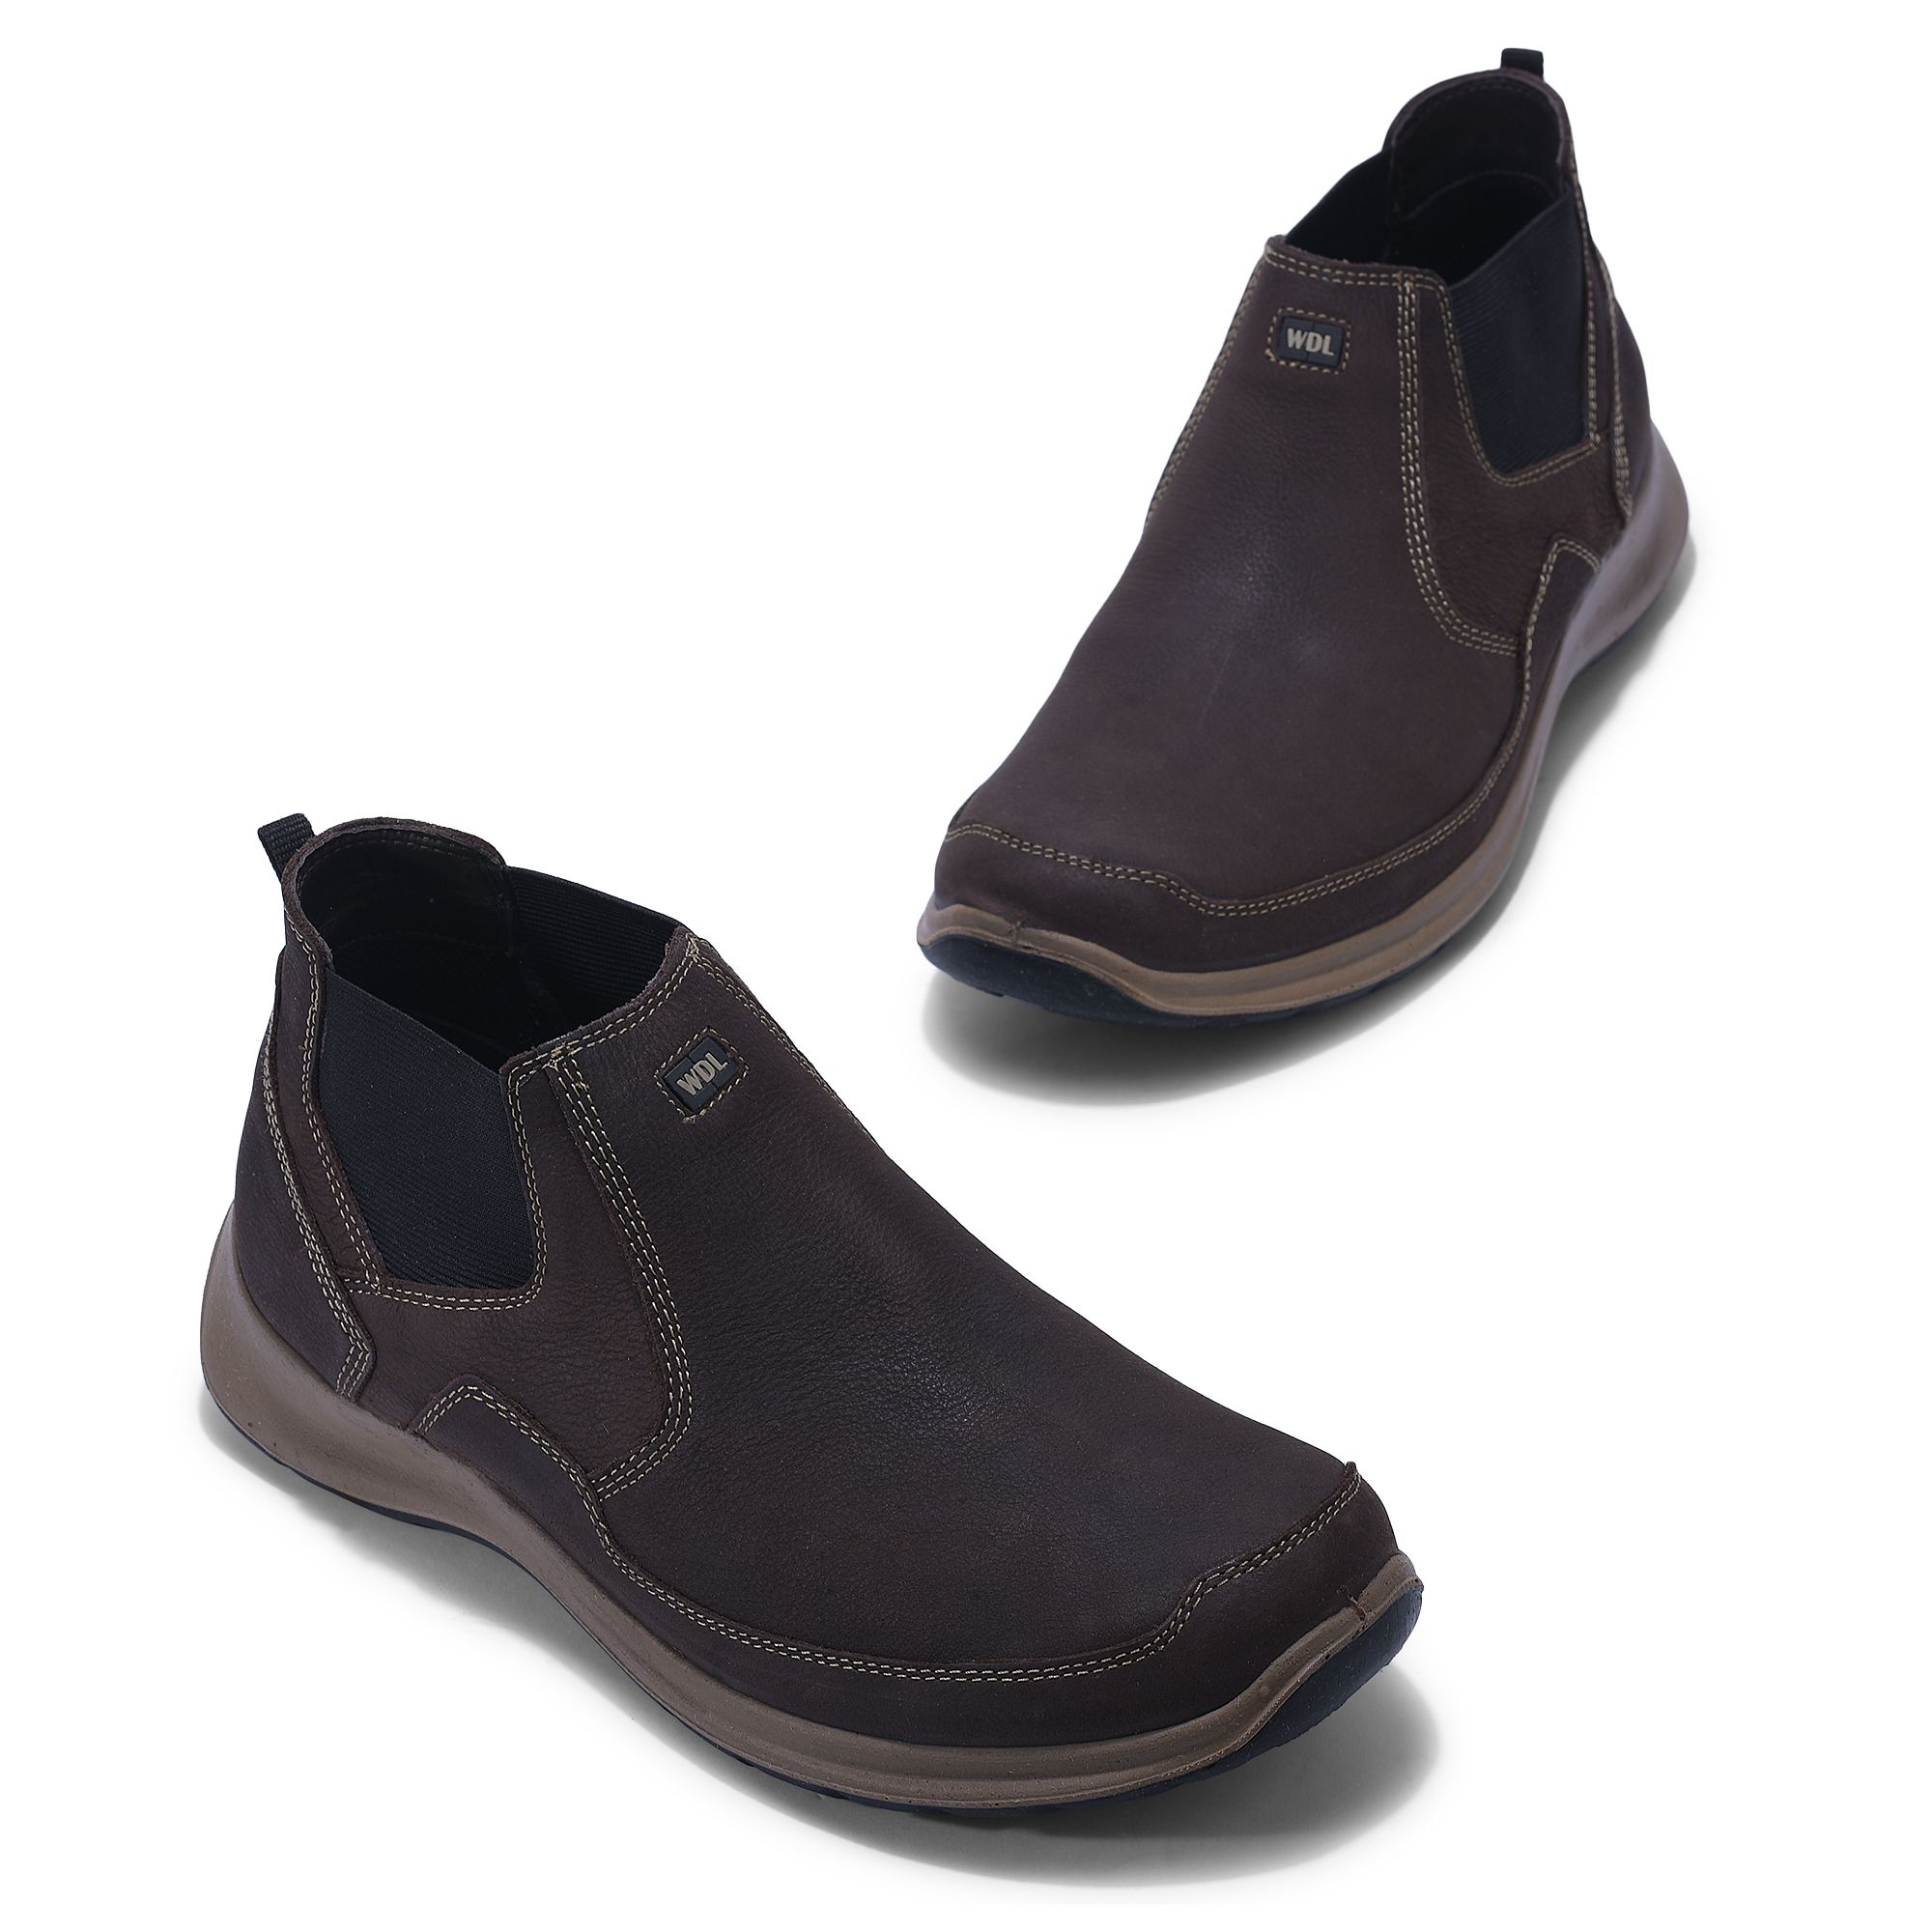 dark brown boots 3 897 mrp 6 495 40 % off prices include taxes color ...